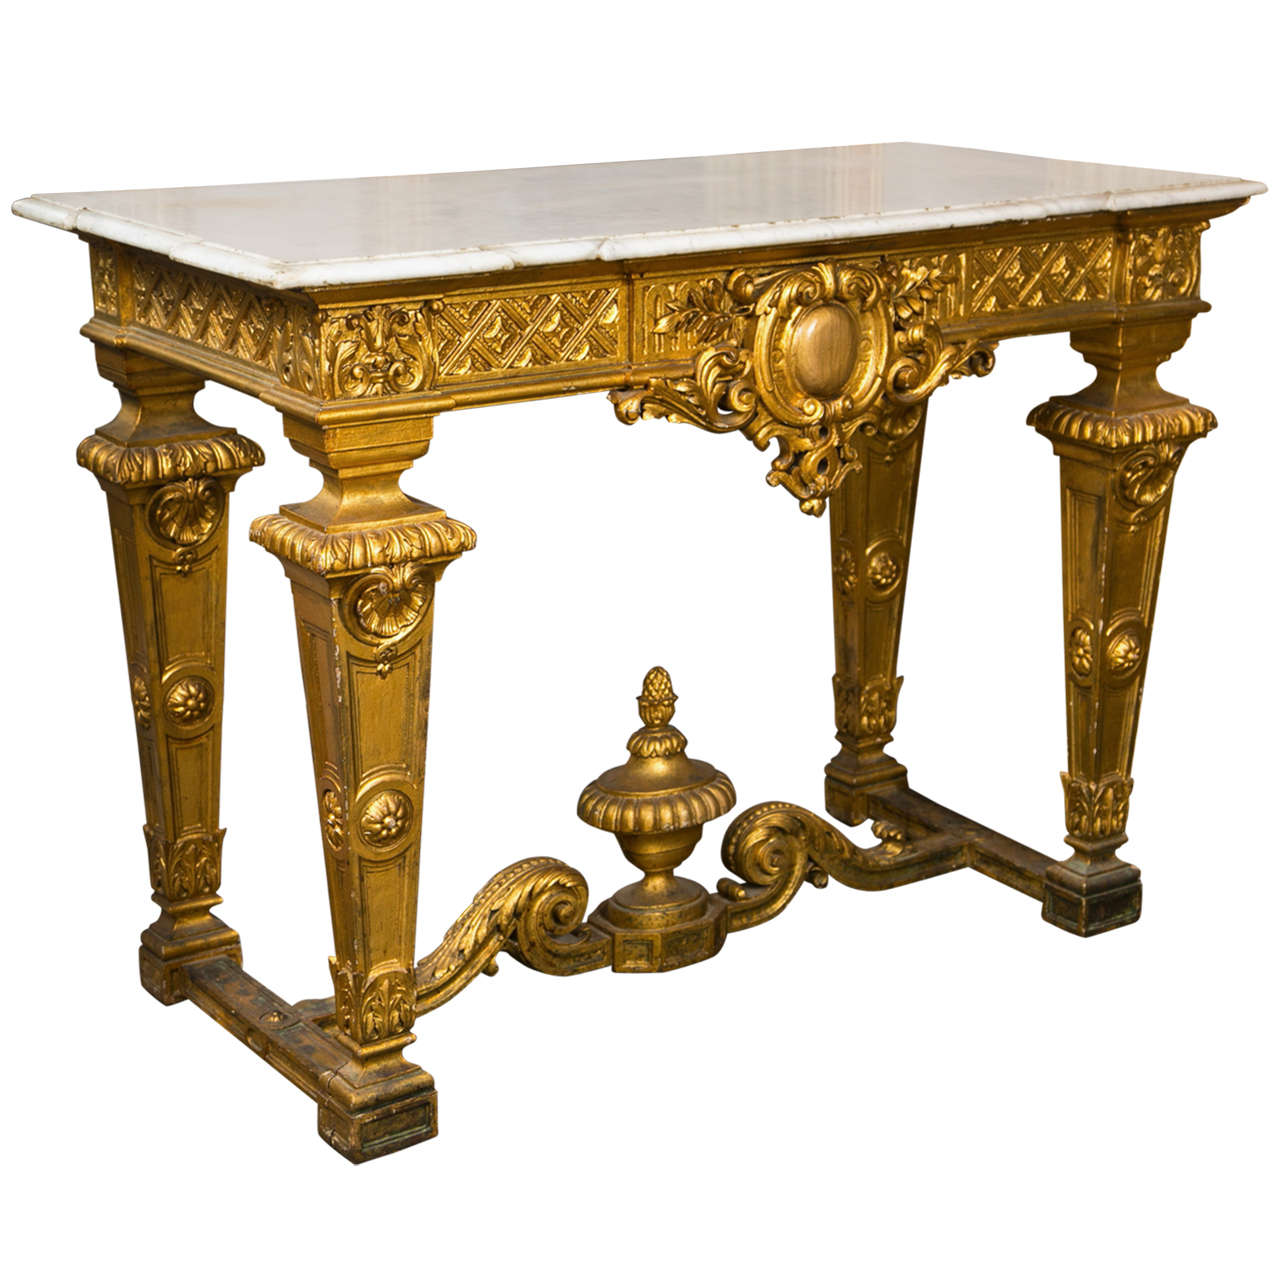 French Gilt Wood Console, C.1880- 1900